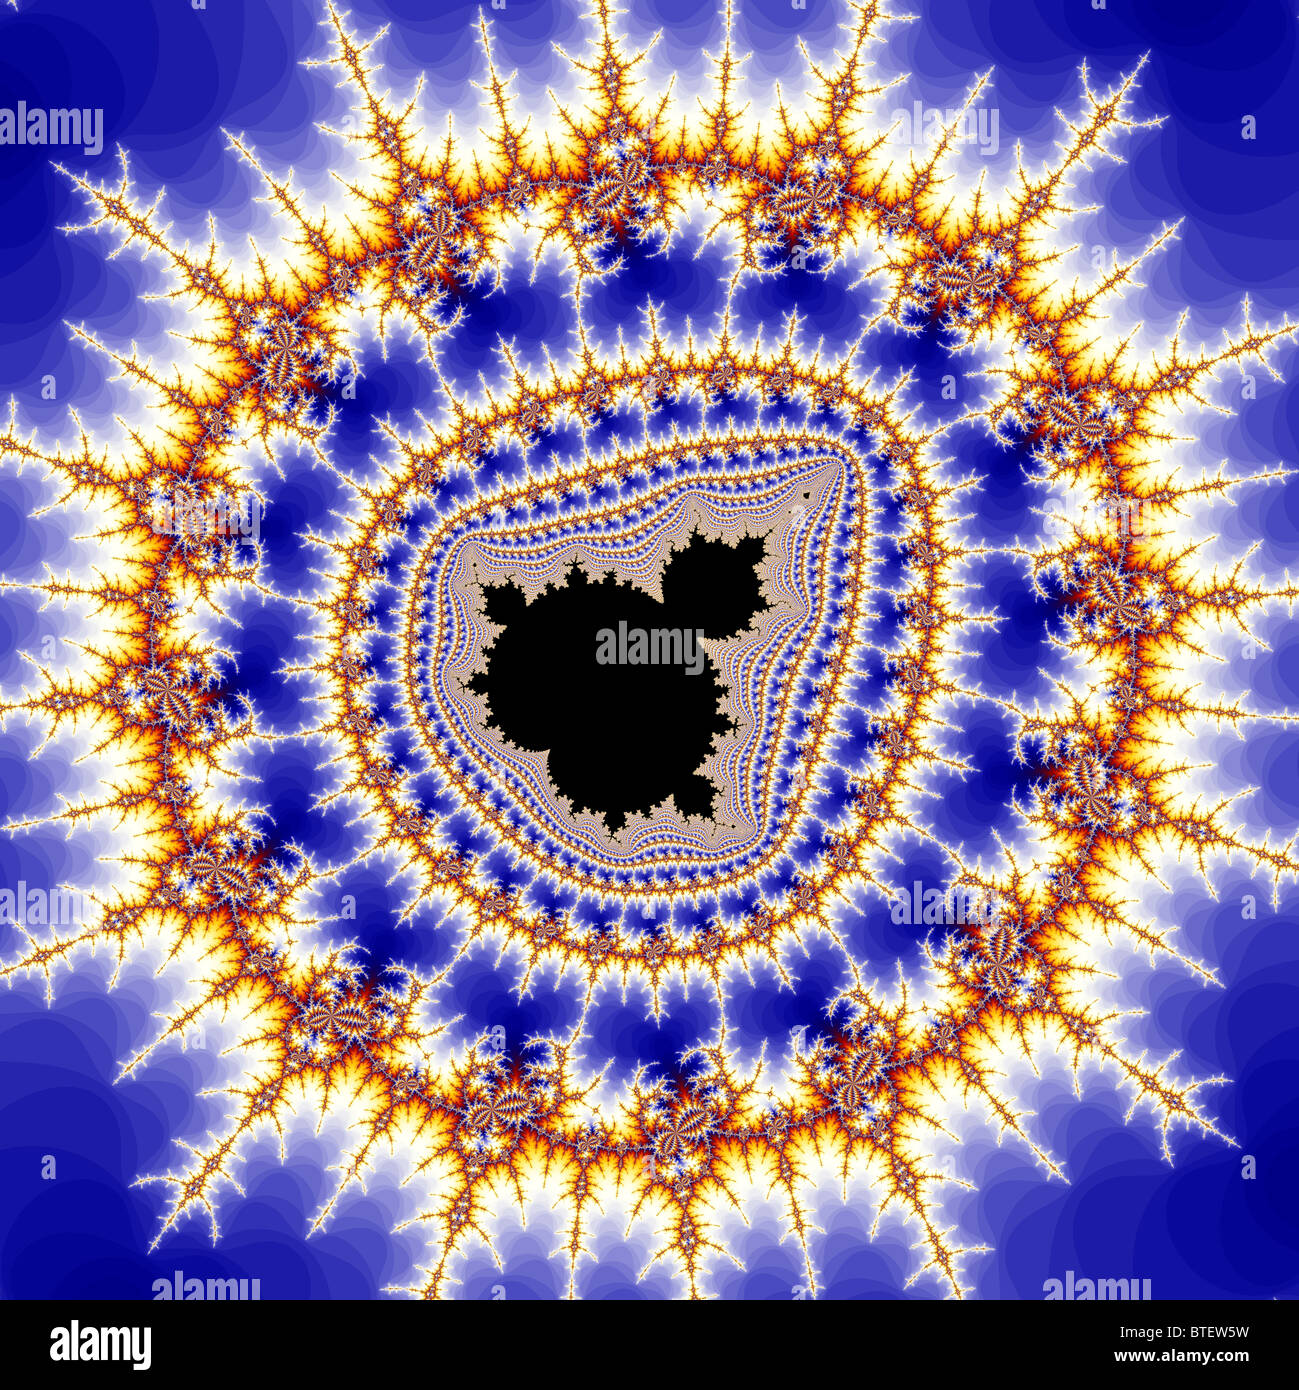 The Mandelbrot Set contains an infinite number of smaller copies of itself, usually surrounded by intricate patterns. Stock Photo